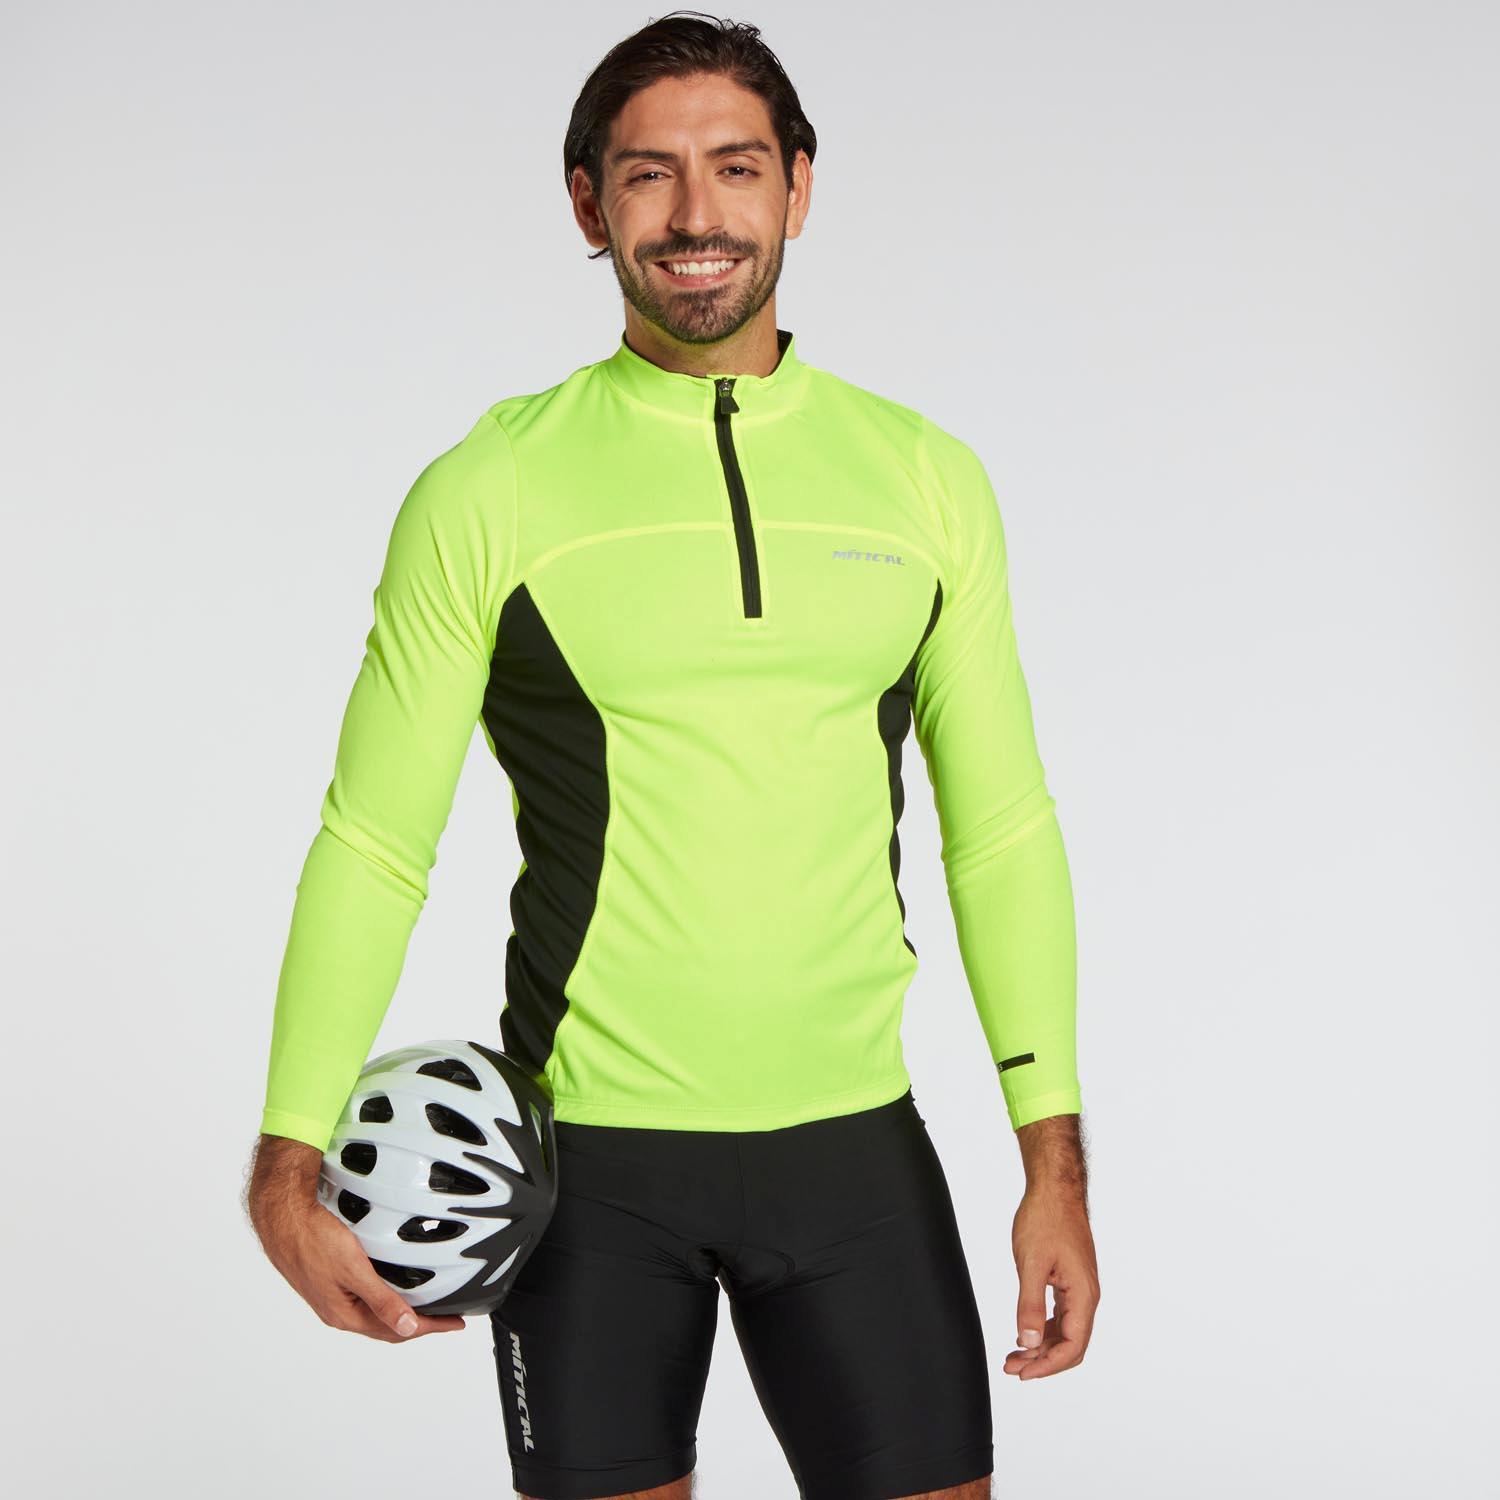 Mitical Bronce - Jaune - Maillot Cyclisme Homme sports taille S